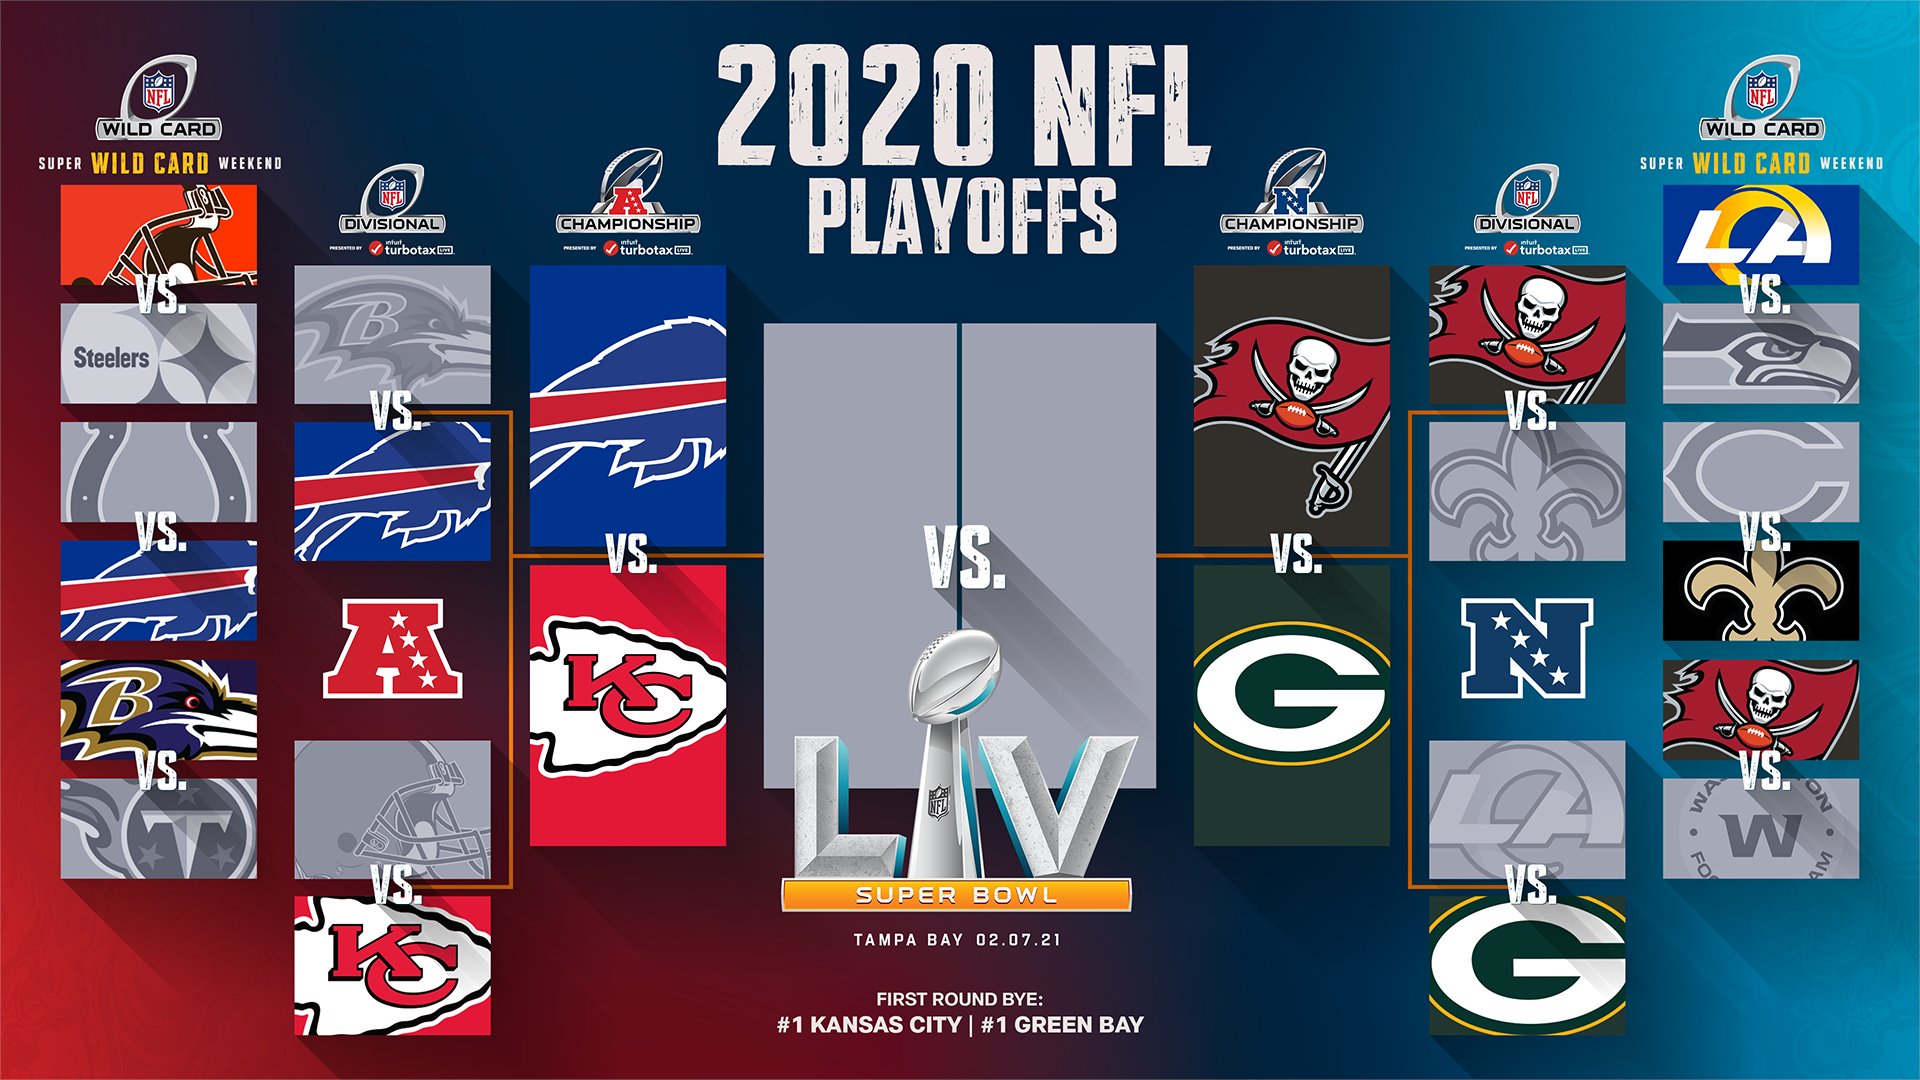 nfc conference championship